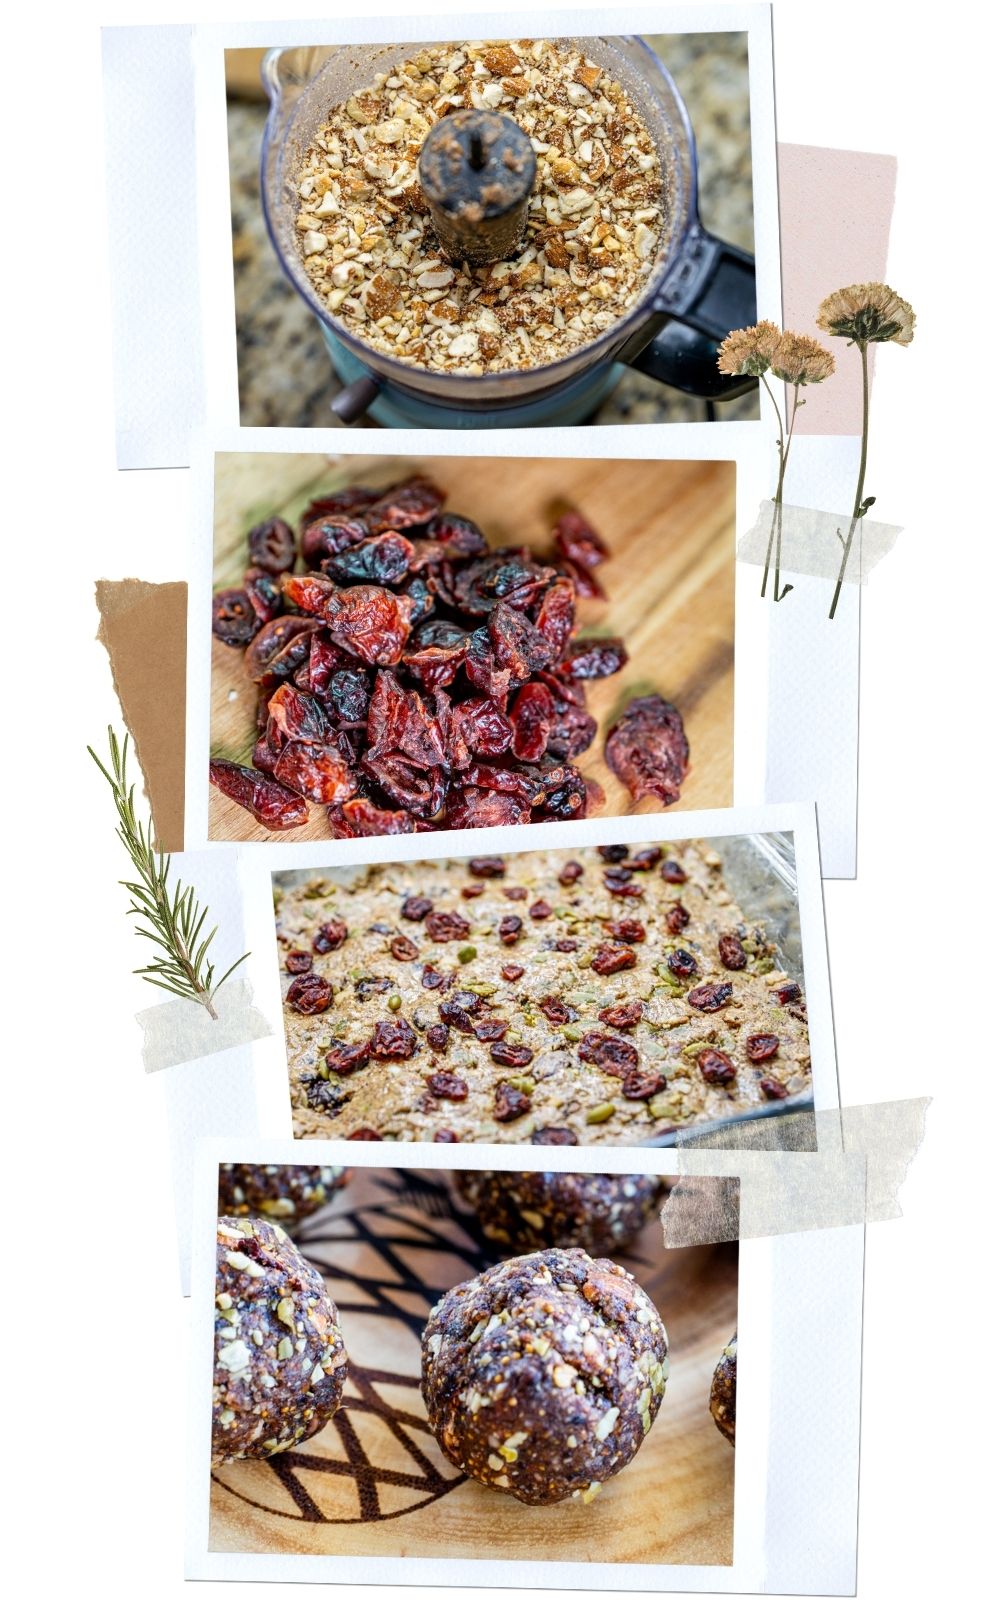 Almond and Cranberry Energy Balls Directions